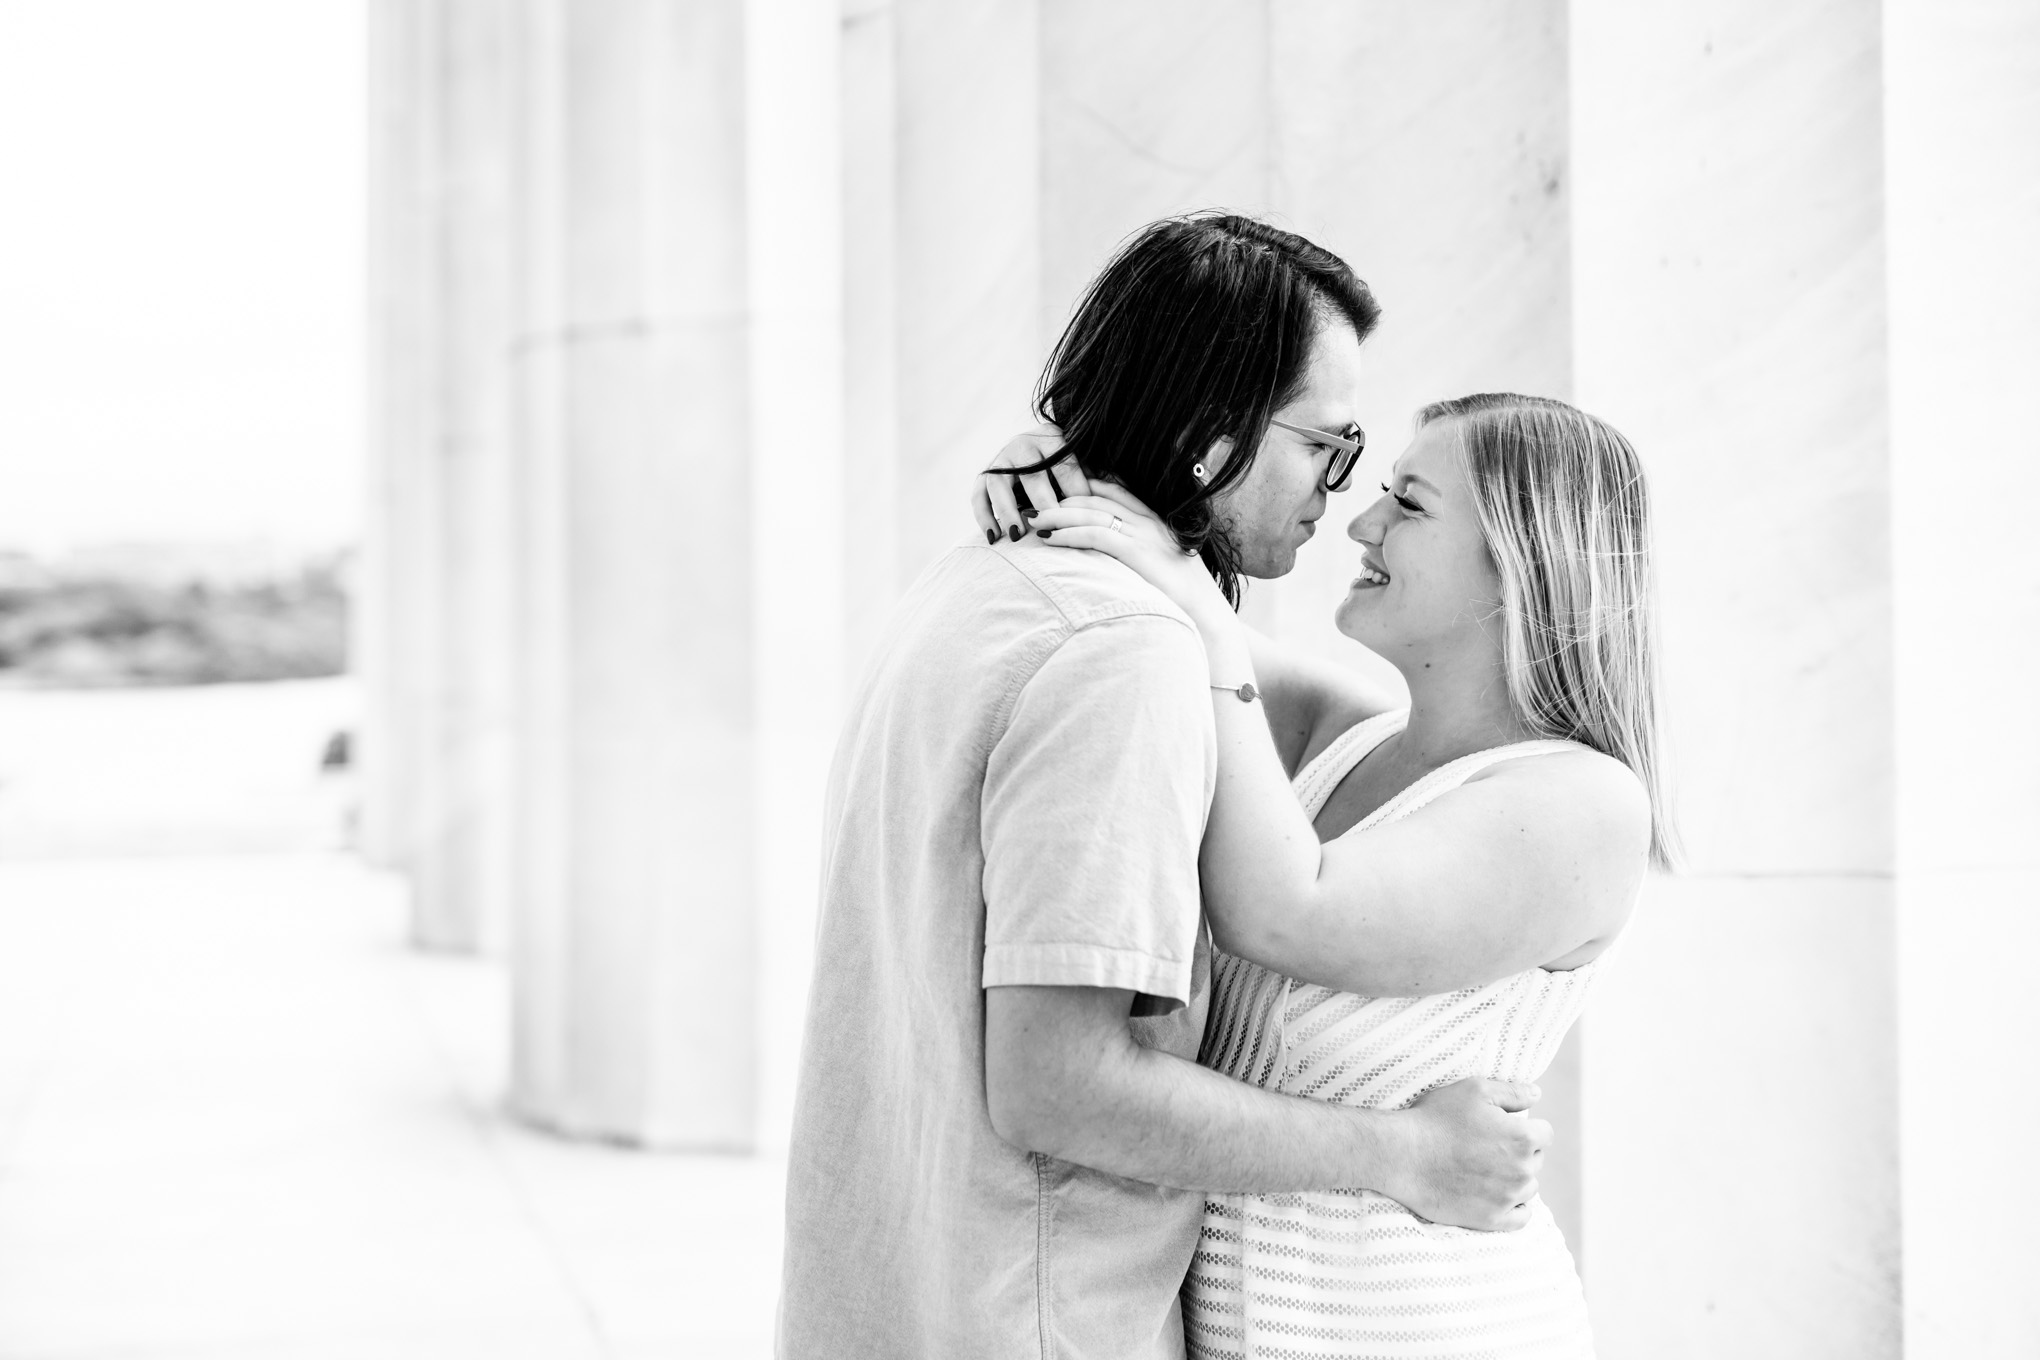 Lincoln Memorial suprise proposal, National Mall proposal, reflecting pool, Lincoln Memorial portraits, National Mall portraits, engagement photos, proposal portraits, surprise proposal photos, Rachel E.H. Photography, D.C. portraits, Virginia wedding photographer, Maryland wedding photographer, Baltimore wedding photographer, D.C. wedding photographer, black and white portraits